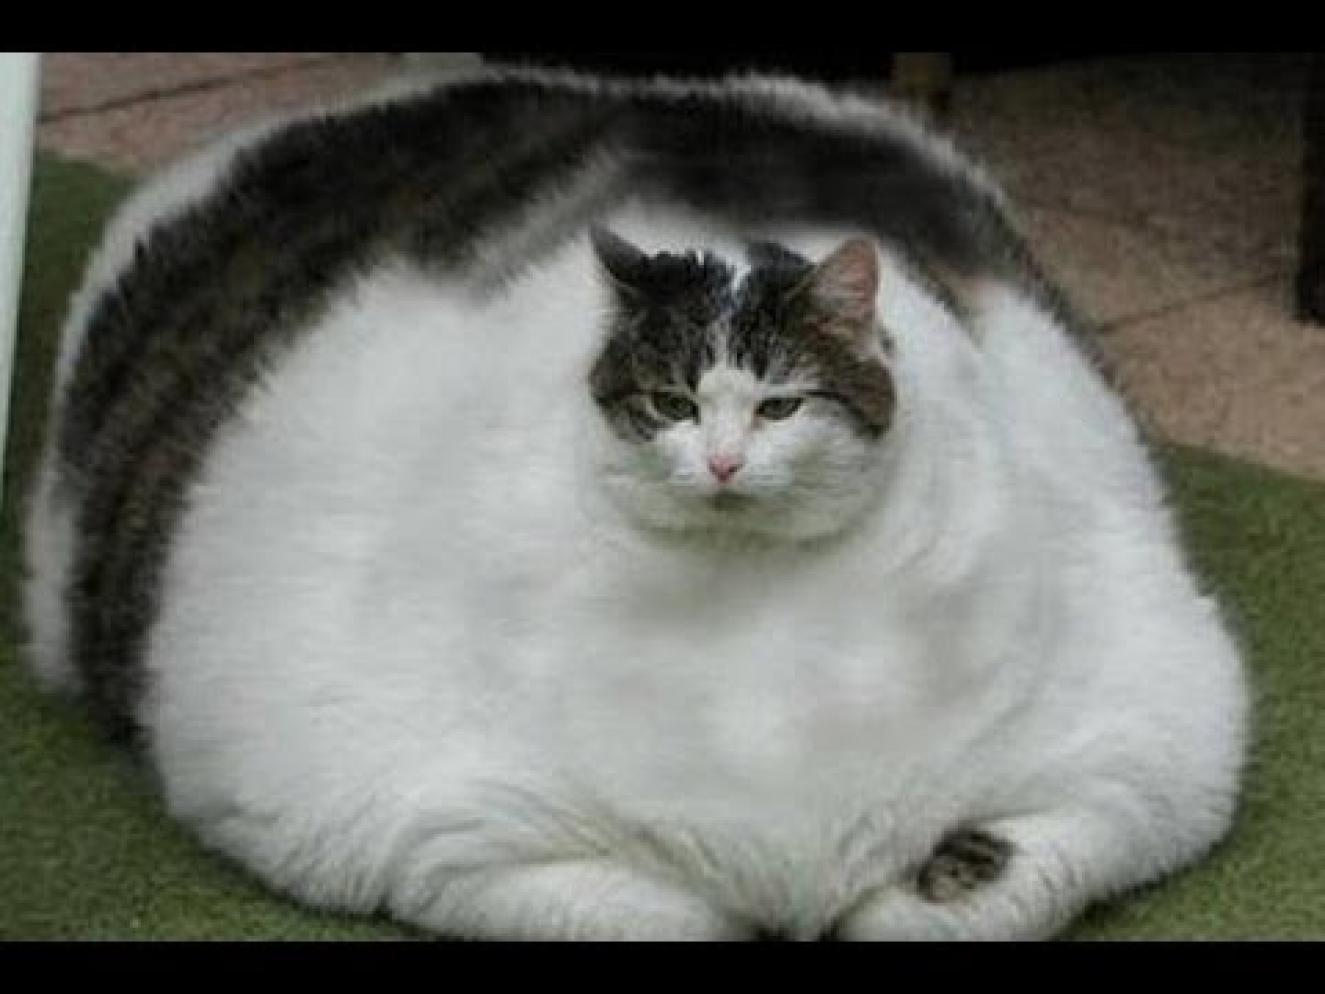 Top 18 Extremely Fat Cats